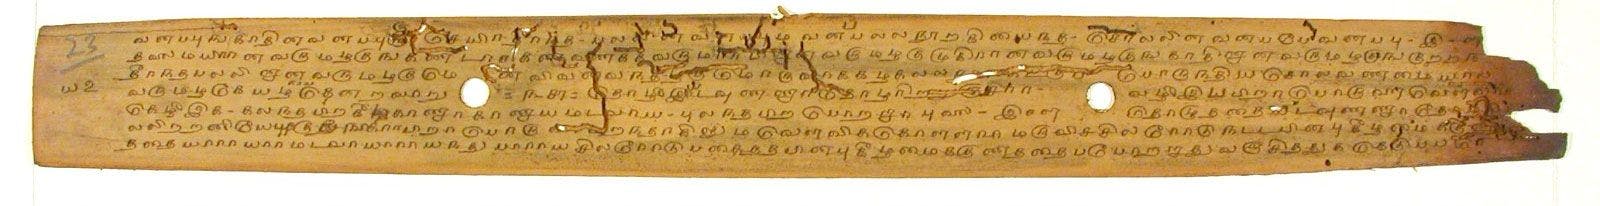 A palm leaf manuscript with ancient Tamil text